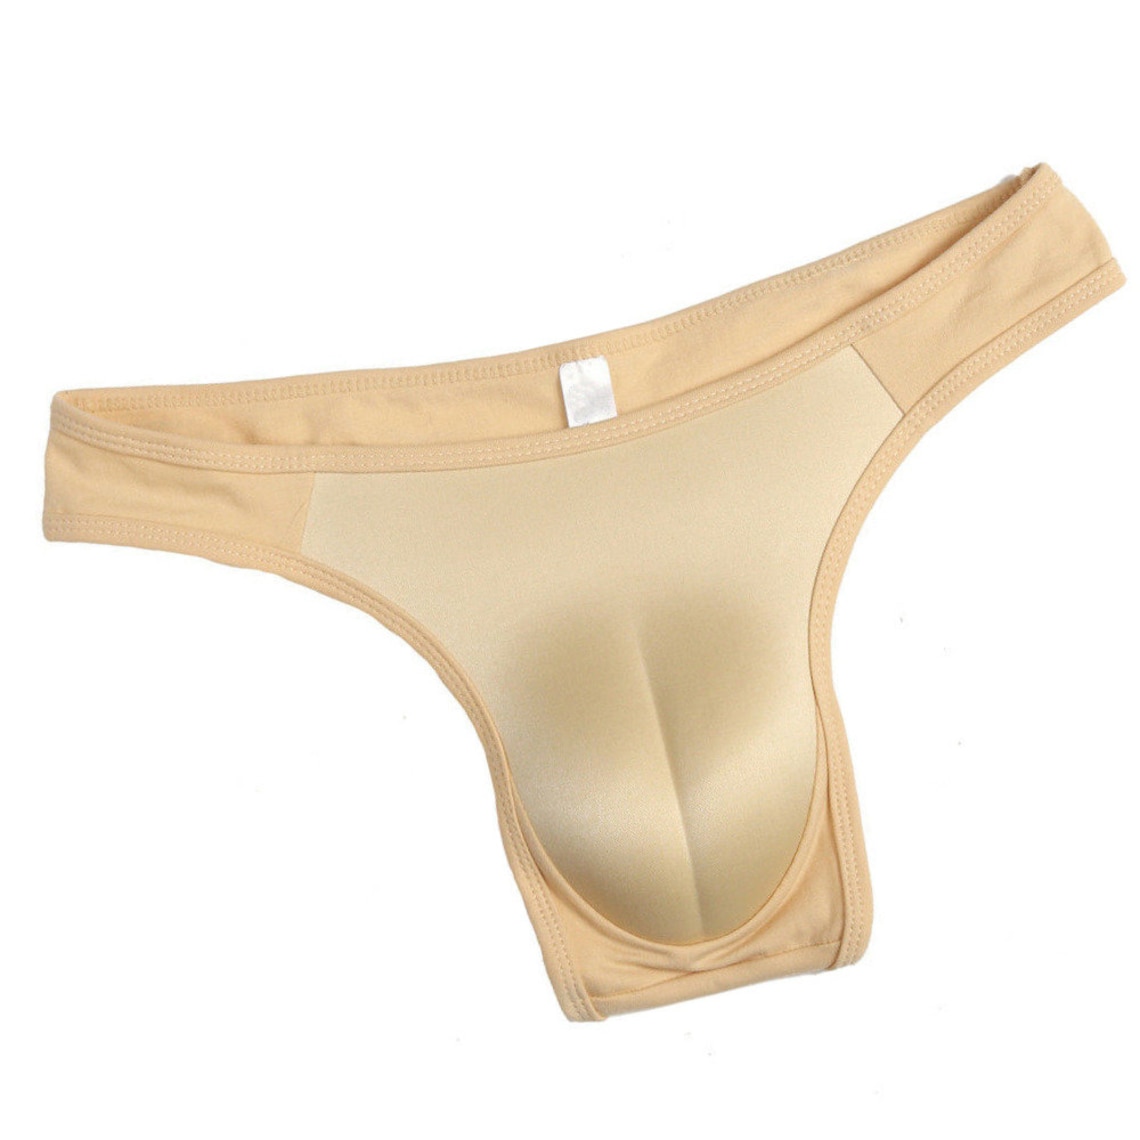 Camel Toe Panty Gaff for Male to Female Cross-dressing - Etsy